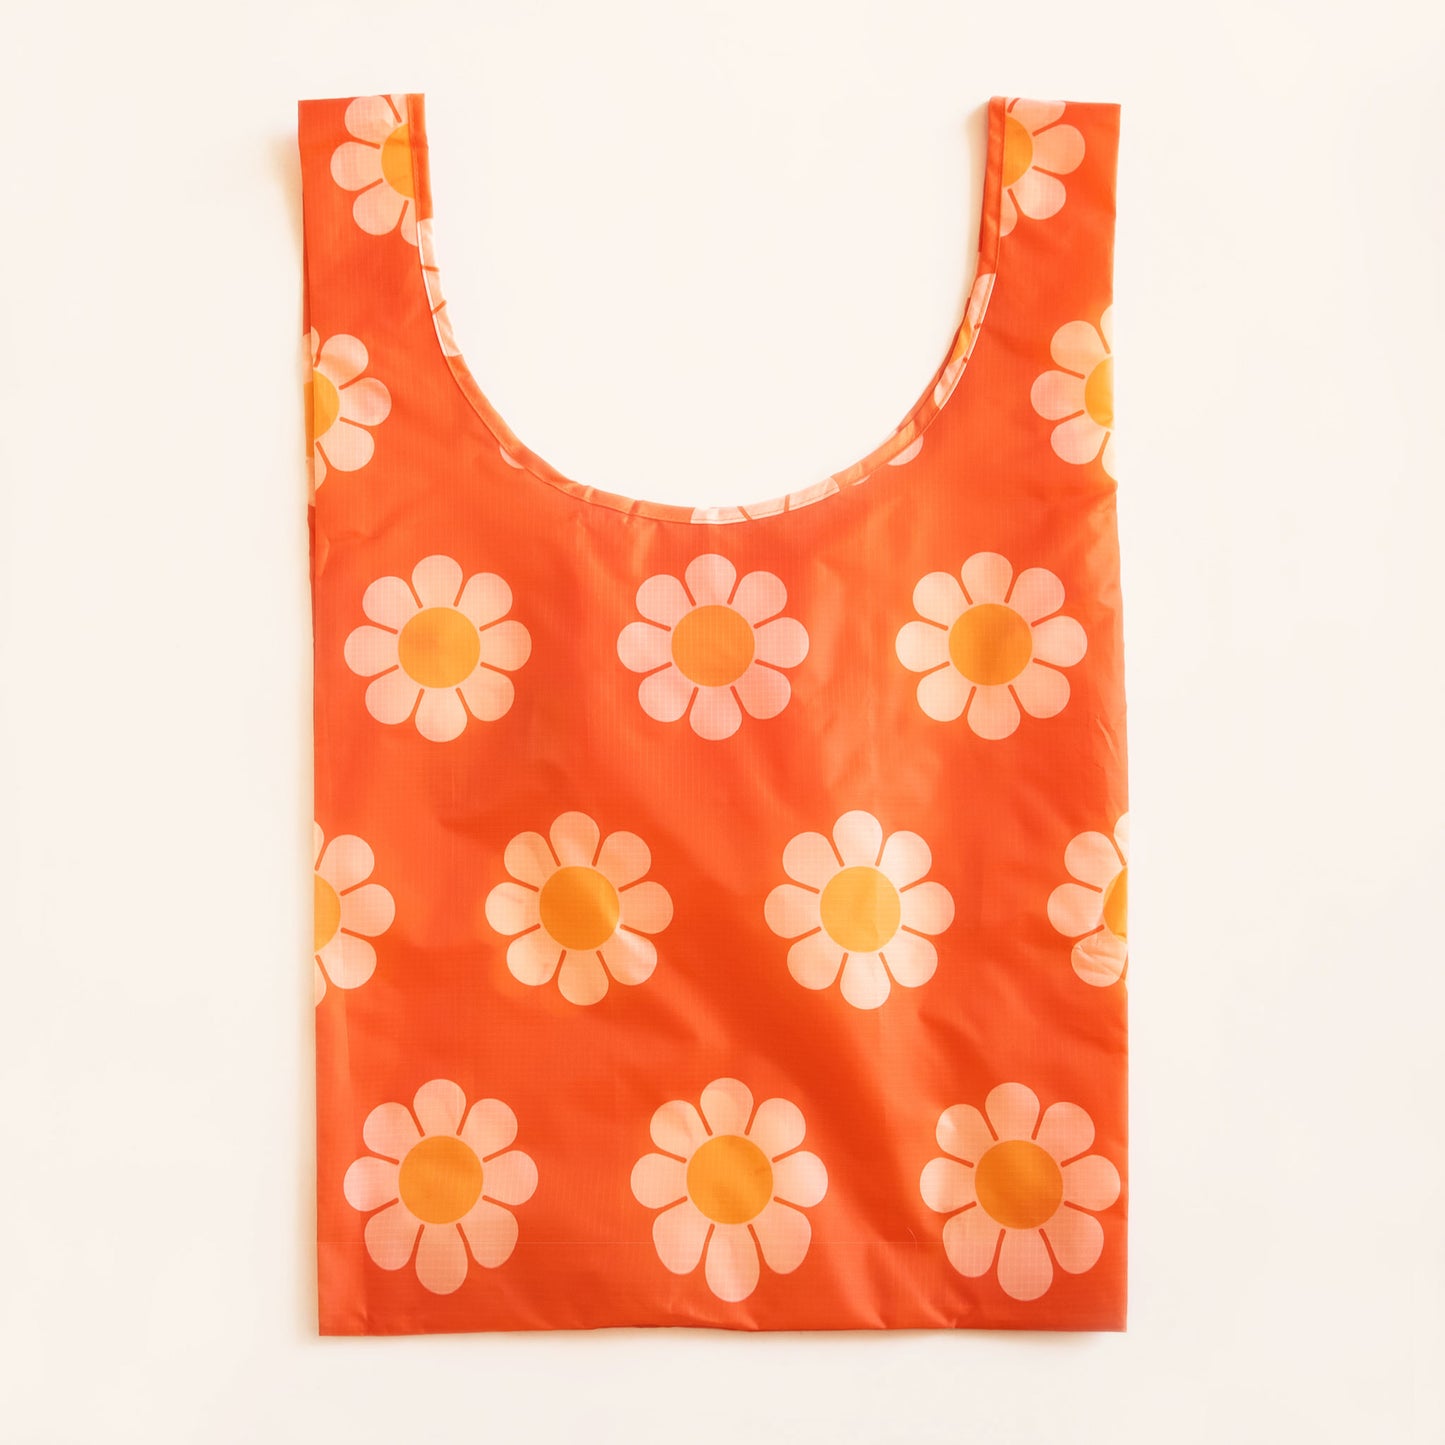 Red-orange reusable covered in a print of simple flowers with white petals and orange centers. The bag is positioned flat on a table and has a 'U' shape between two handles. 